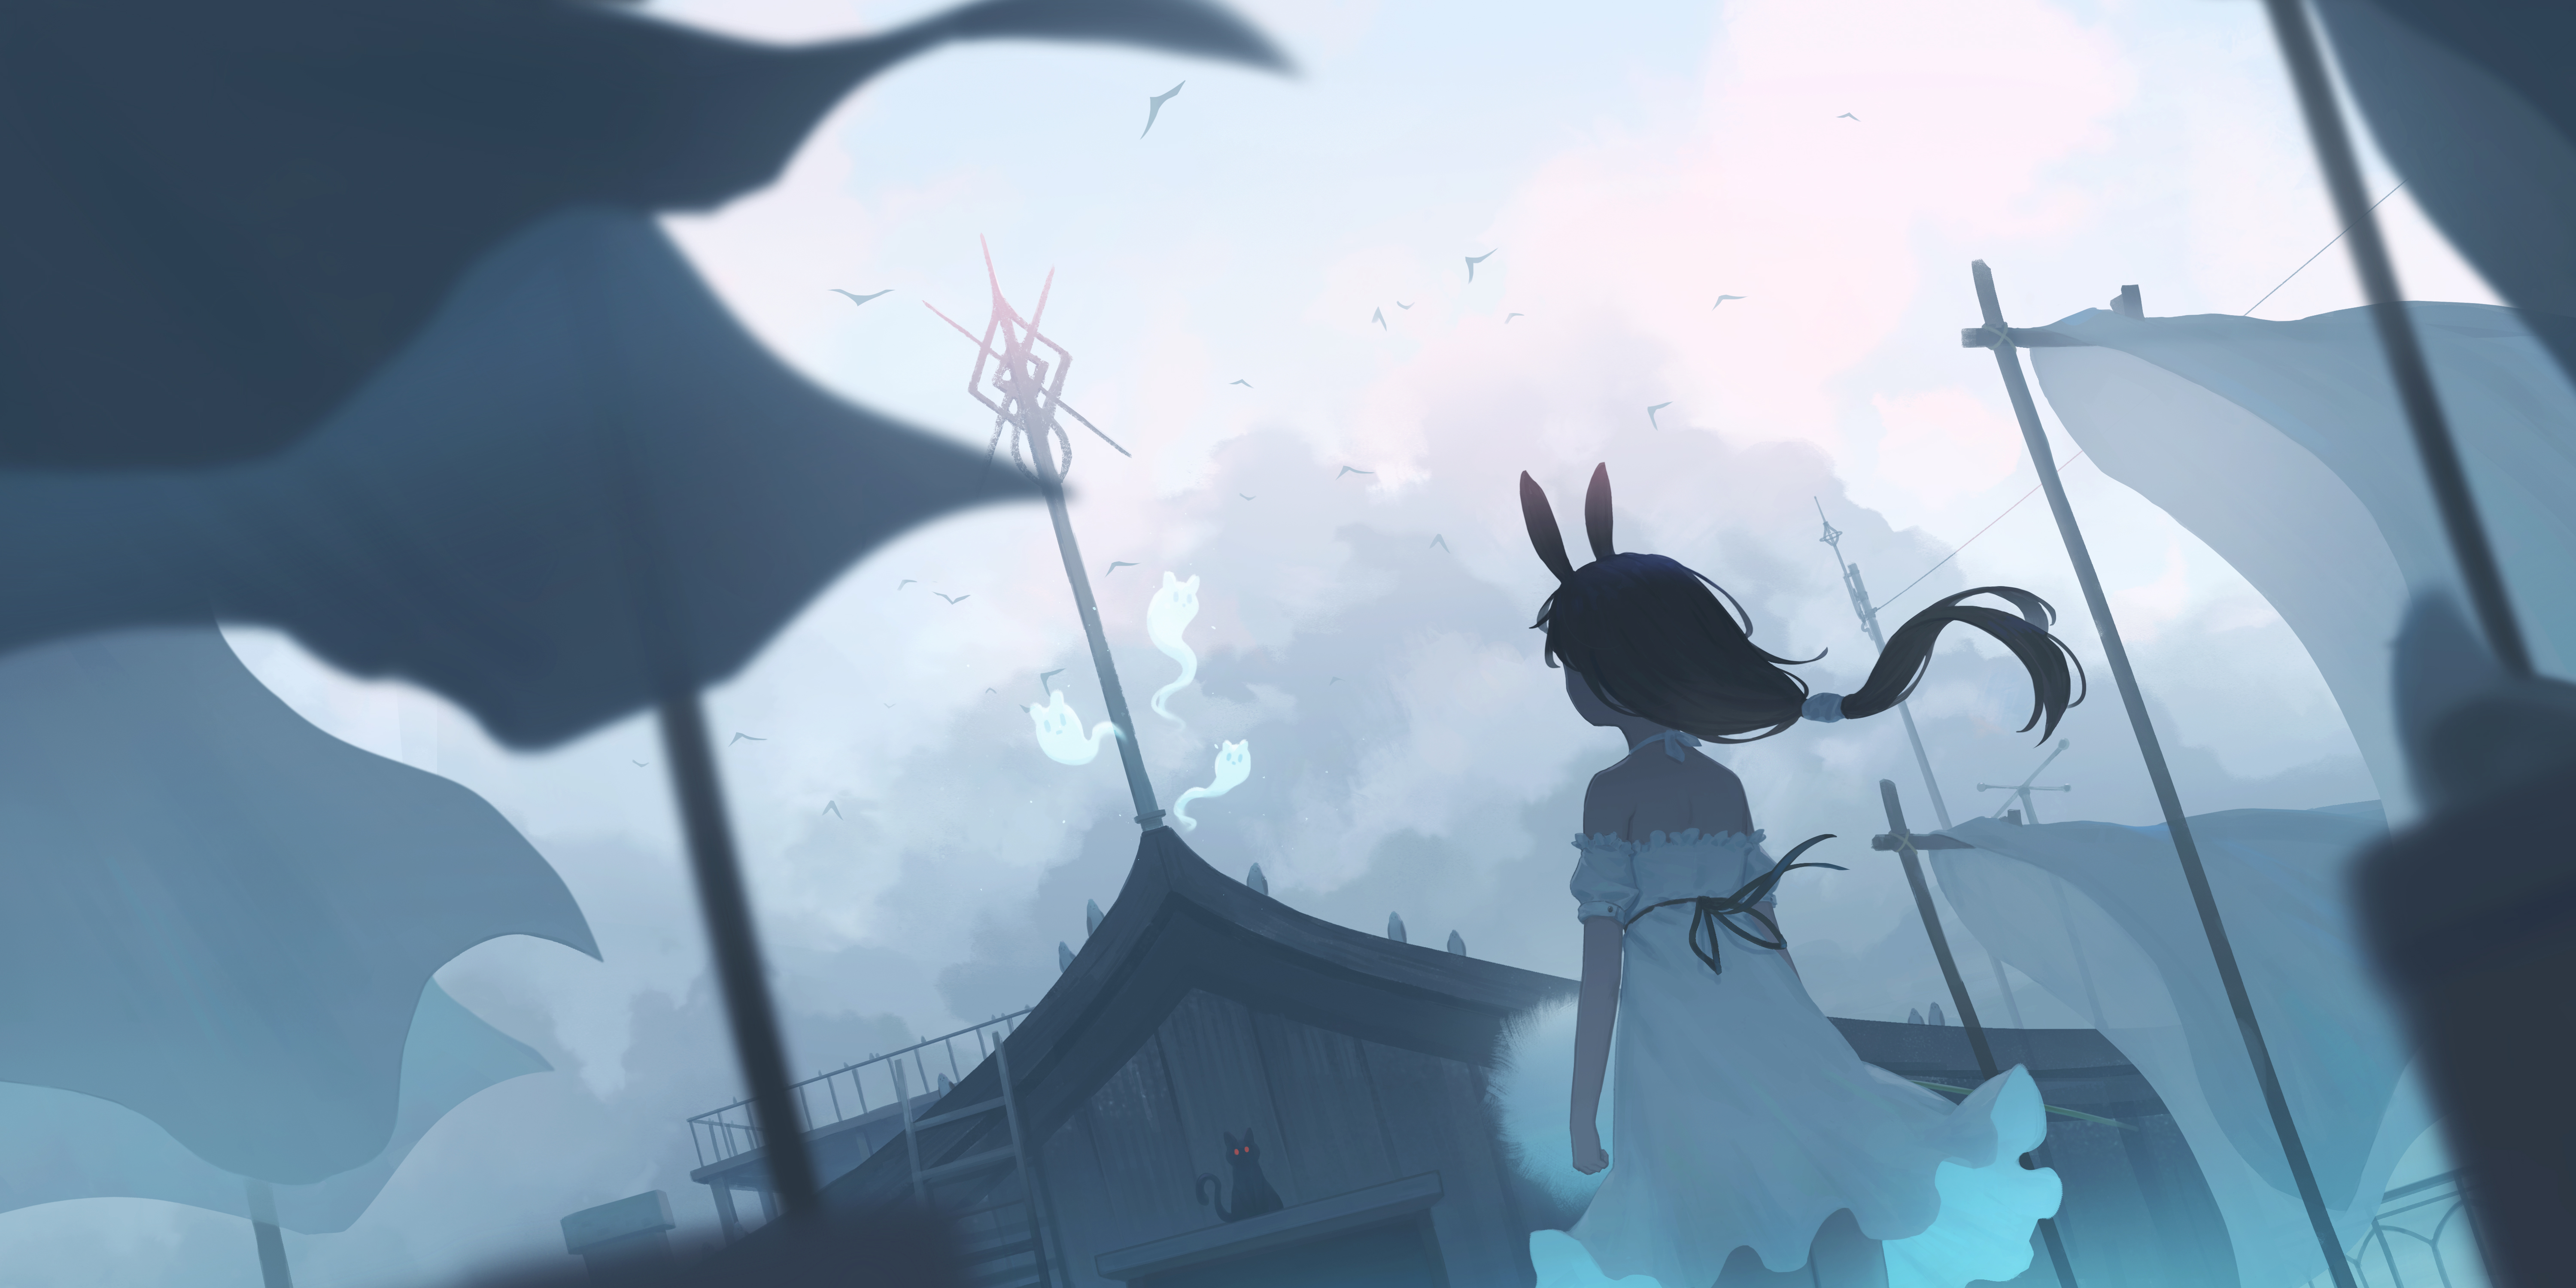 Anime Anime Girls Bunny Girl Bunny Ears Long Hair Standing Looking Into The Distance Sky Clouds Dres 6000x3000